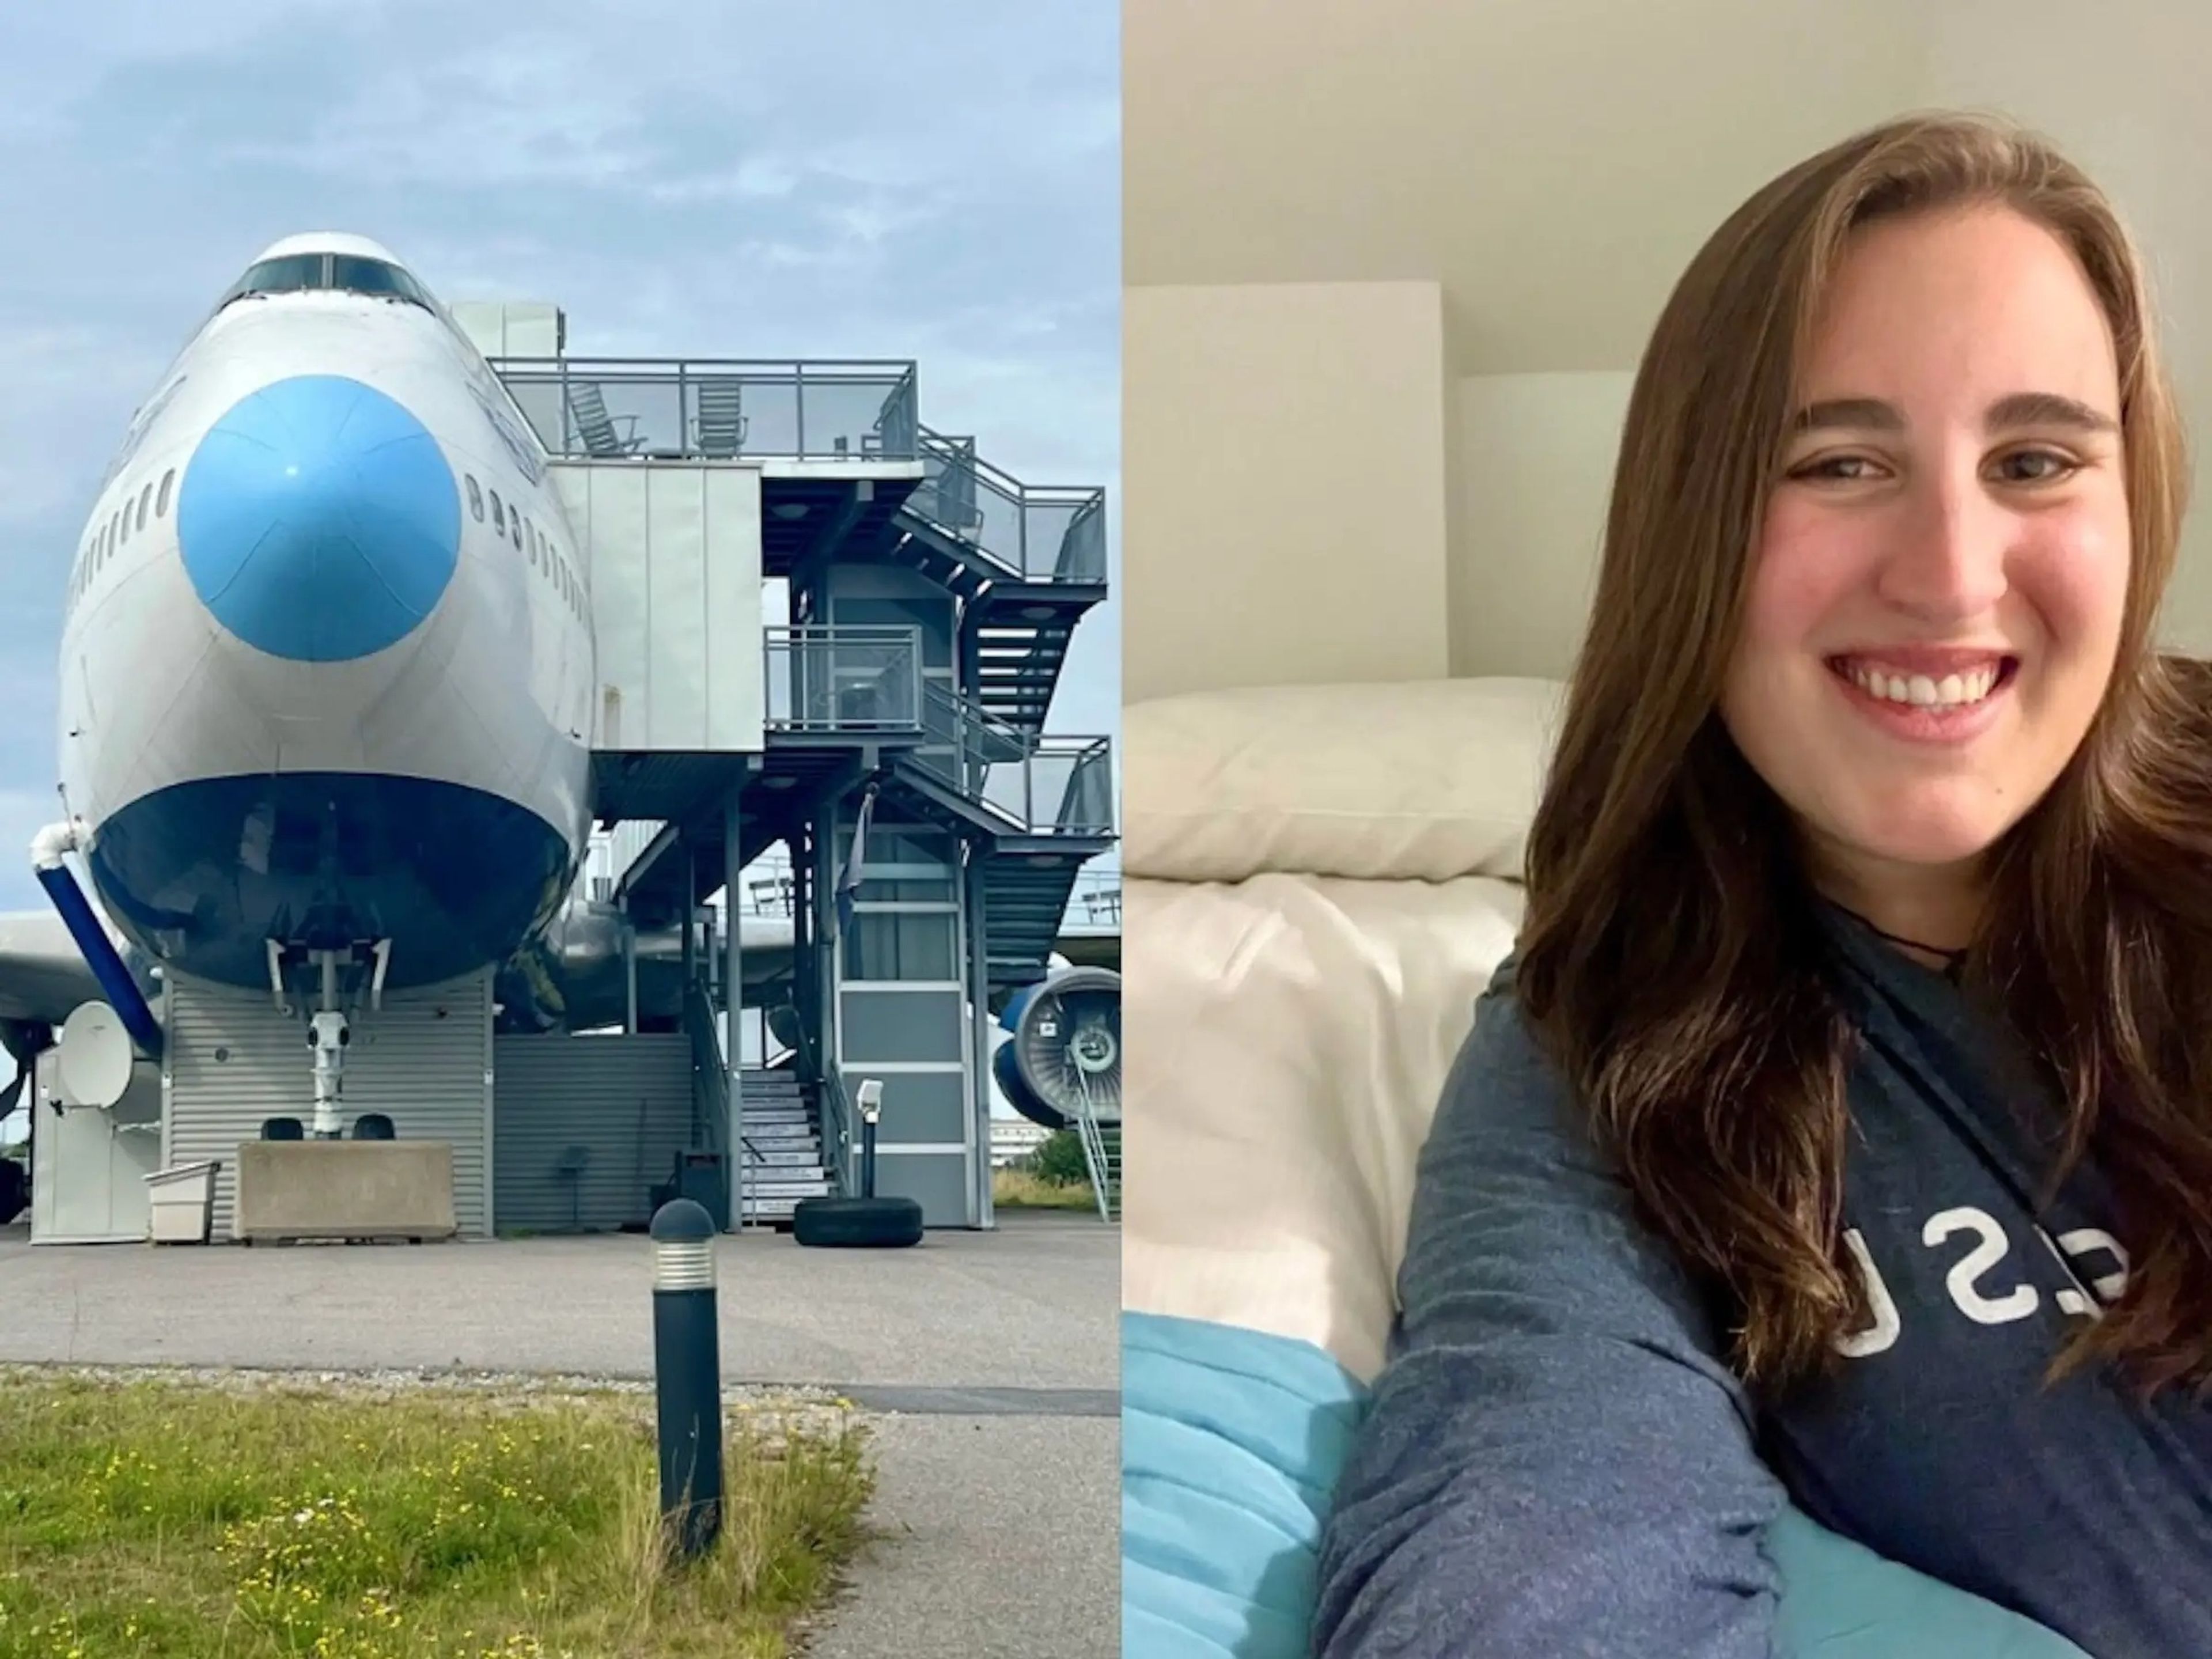 Staying at the Jumbo Stay 747 hotel in Sweden.